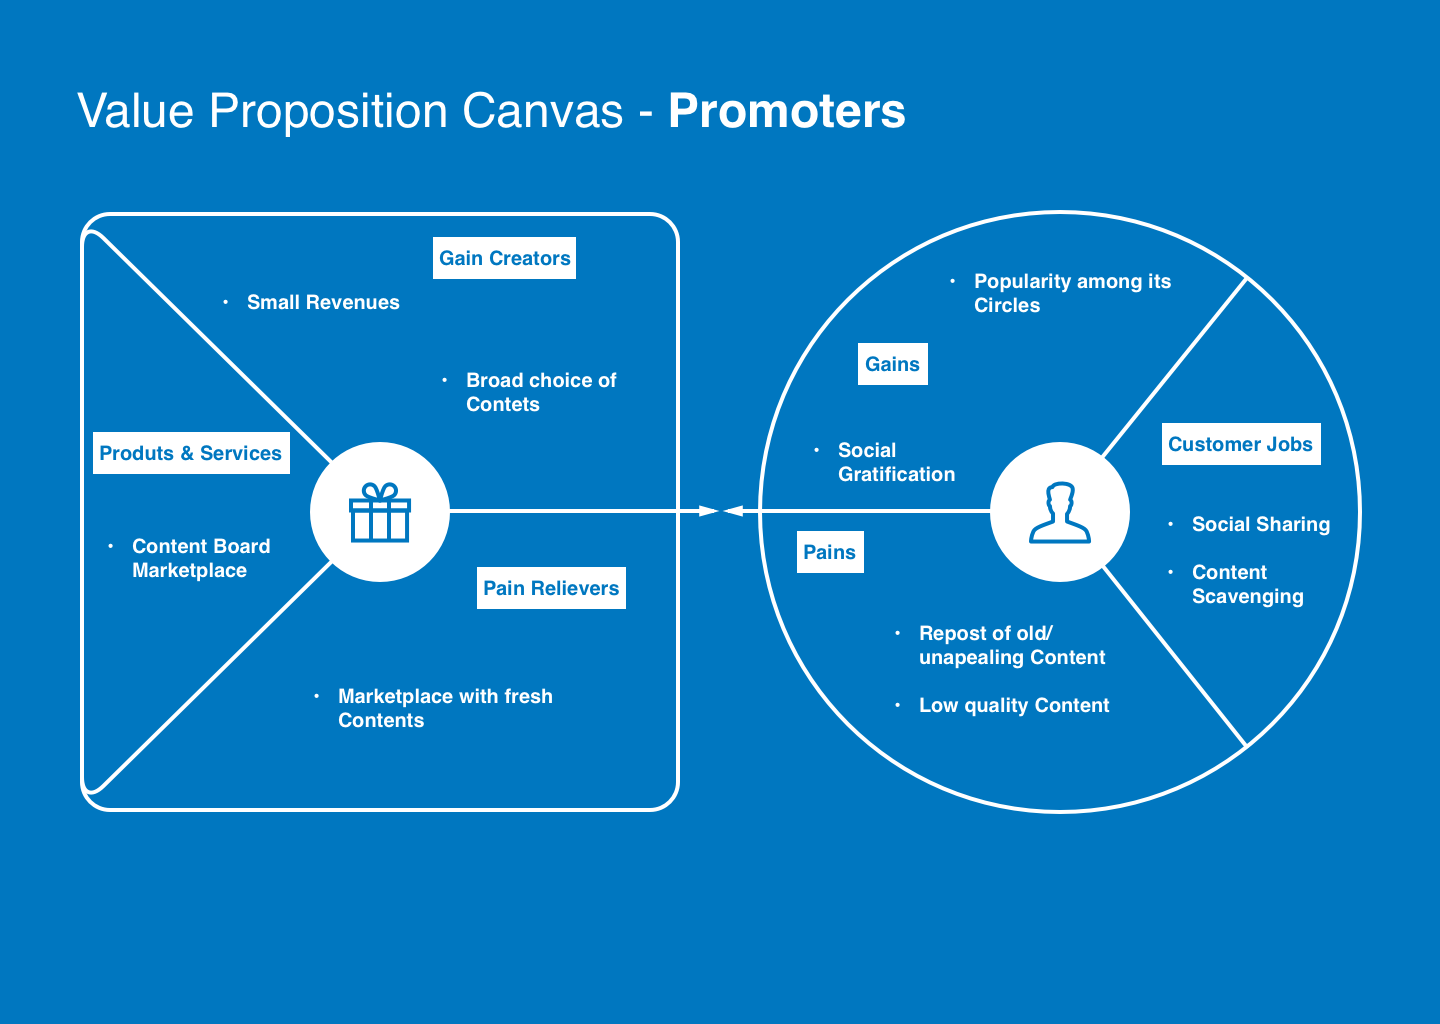 Business Model Canvas - Value proposition for promoters